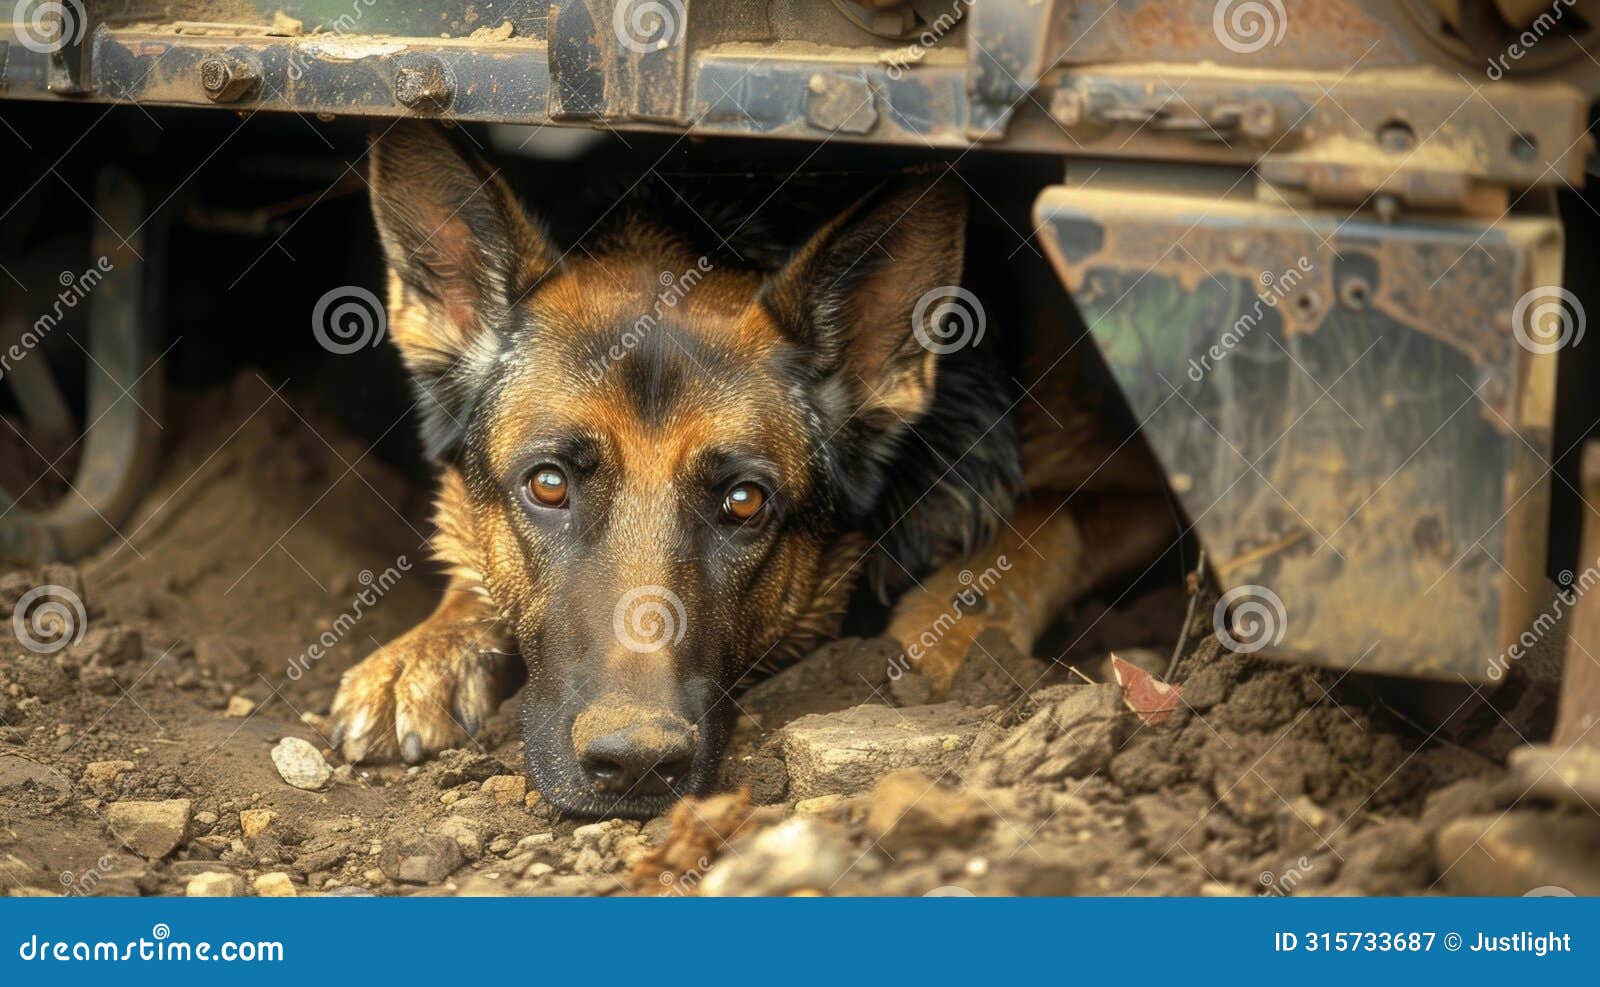 a german shepherd sniffs around a suious vehicle his nose leading him to a hidden stash of explosives.